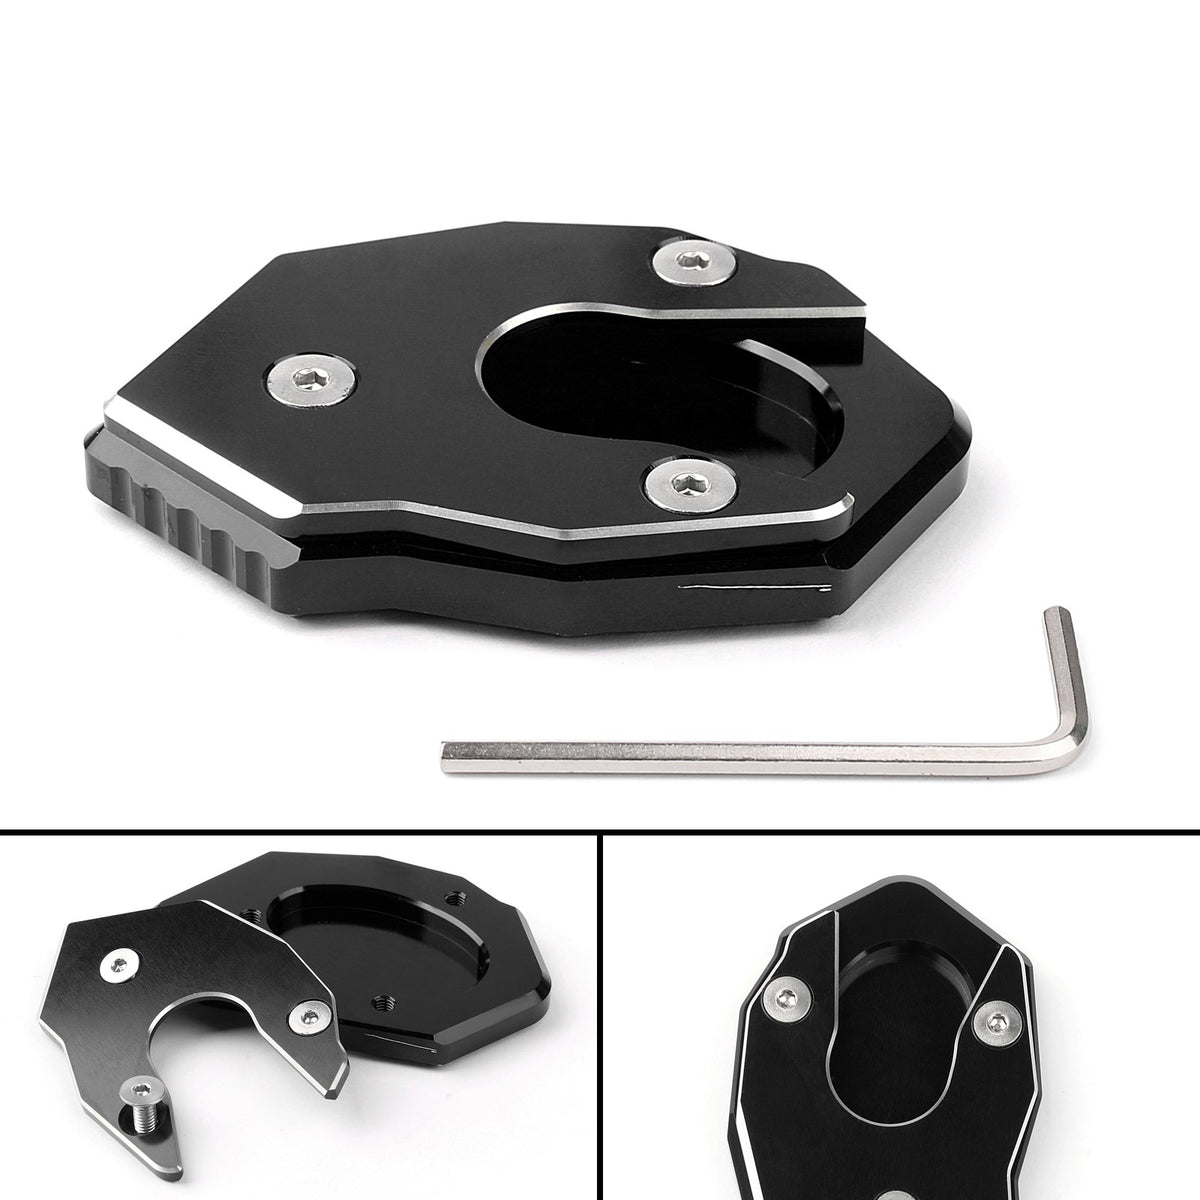 Kickstand Side Plate Stand Extension Pad For Kawasaki Z1000 Z800 ZX-10R ER6F BK